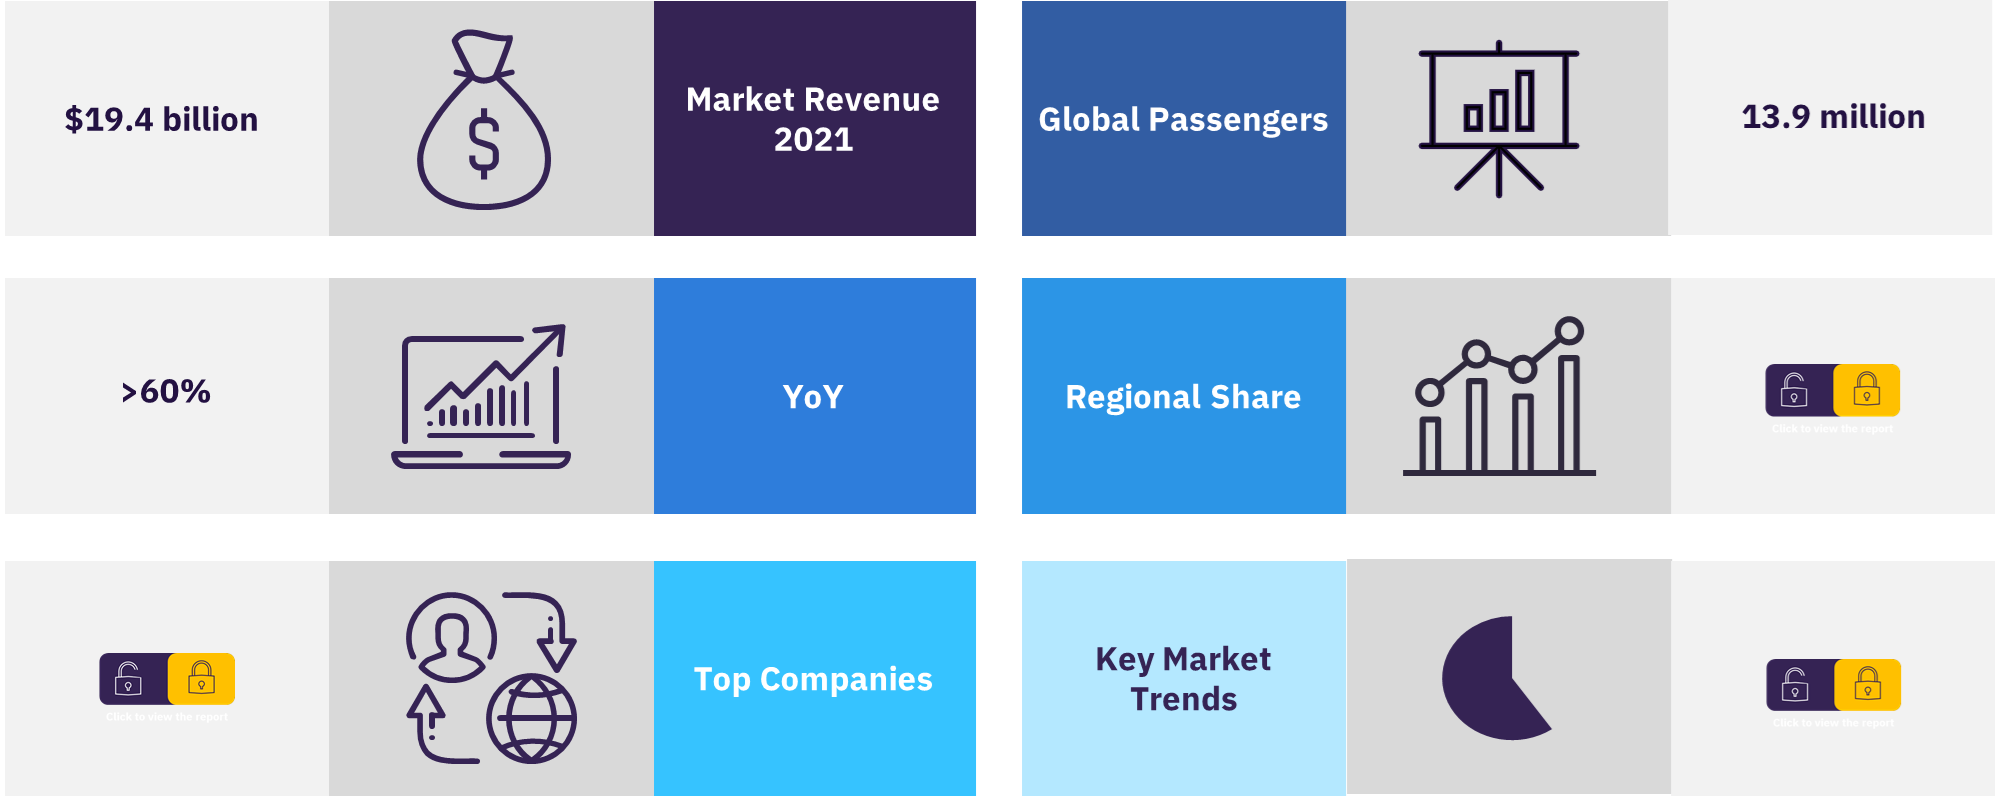 Overview of the global cruise market